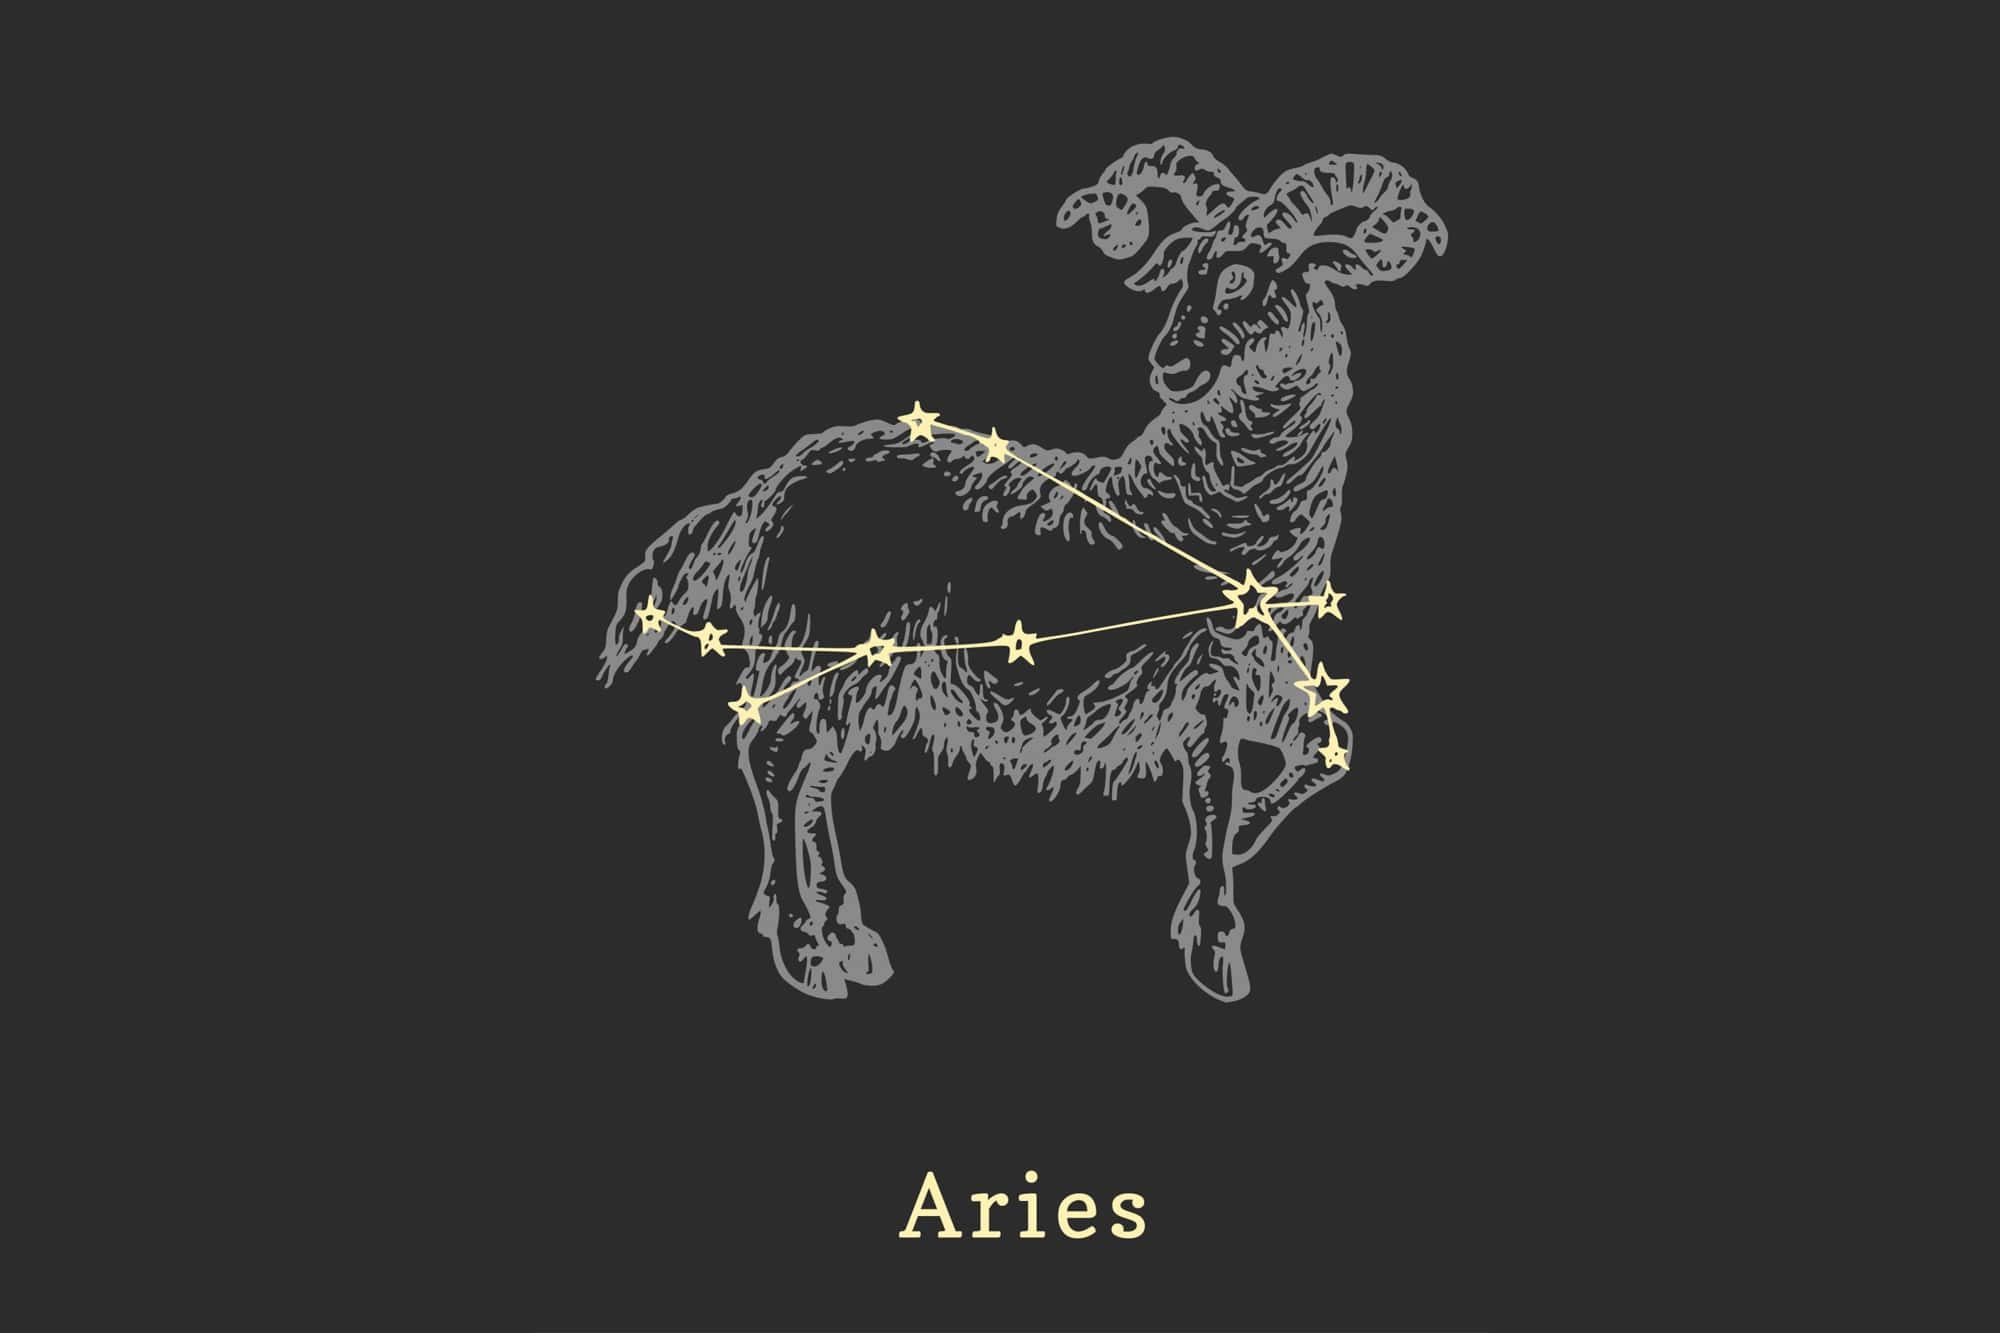 HD wallpaper, Zodiac Sign Influence, 2000X1340 Hd Desktop, Desktop Hd Aries Zodiac Sign Wallpaper, Horoscope Effects, Ruling Planet For Aries